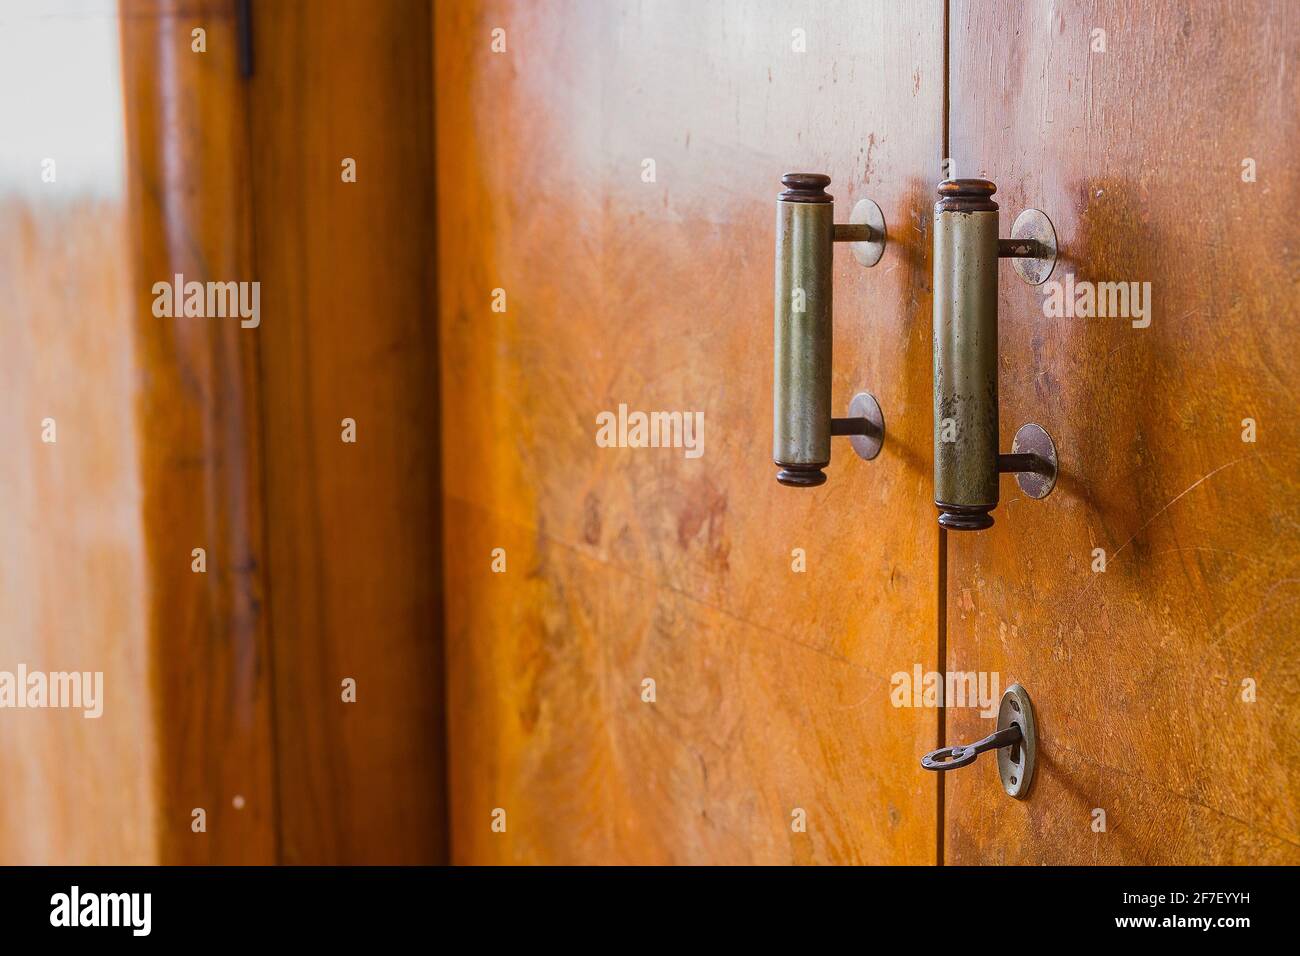 Old knob, lock and handles on an old wooden furniture. Visible also lock and a key on an old decayed wooden door Stock Photo